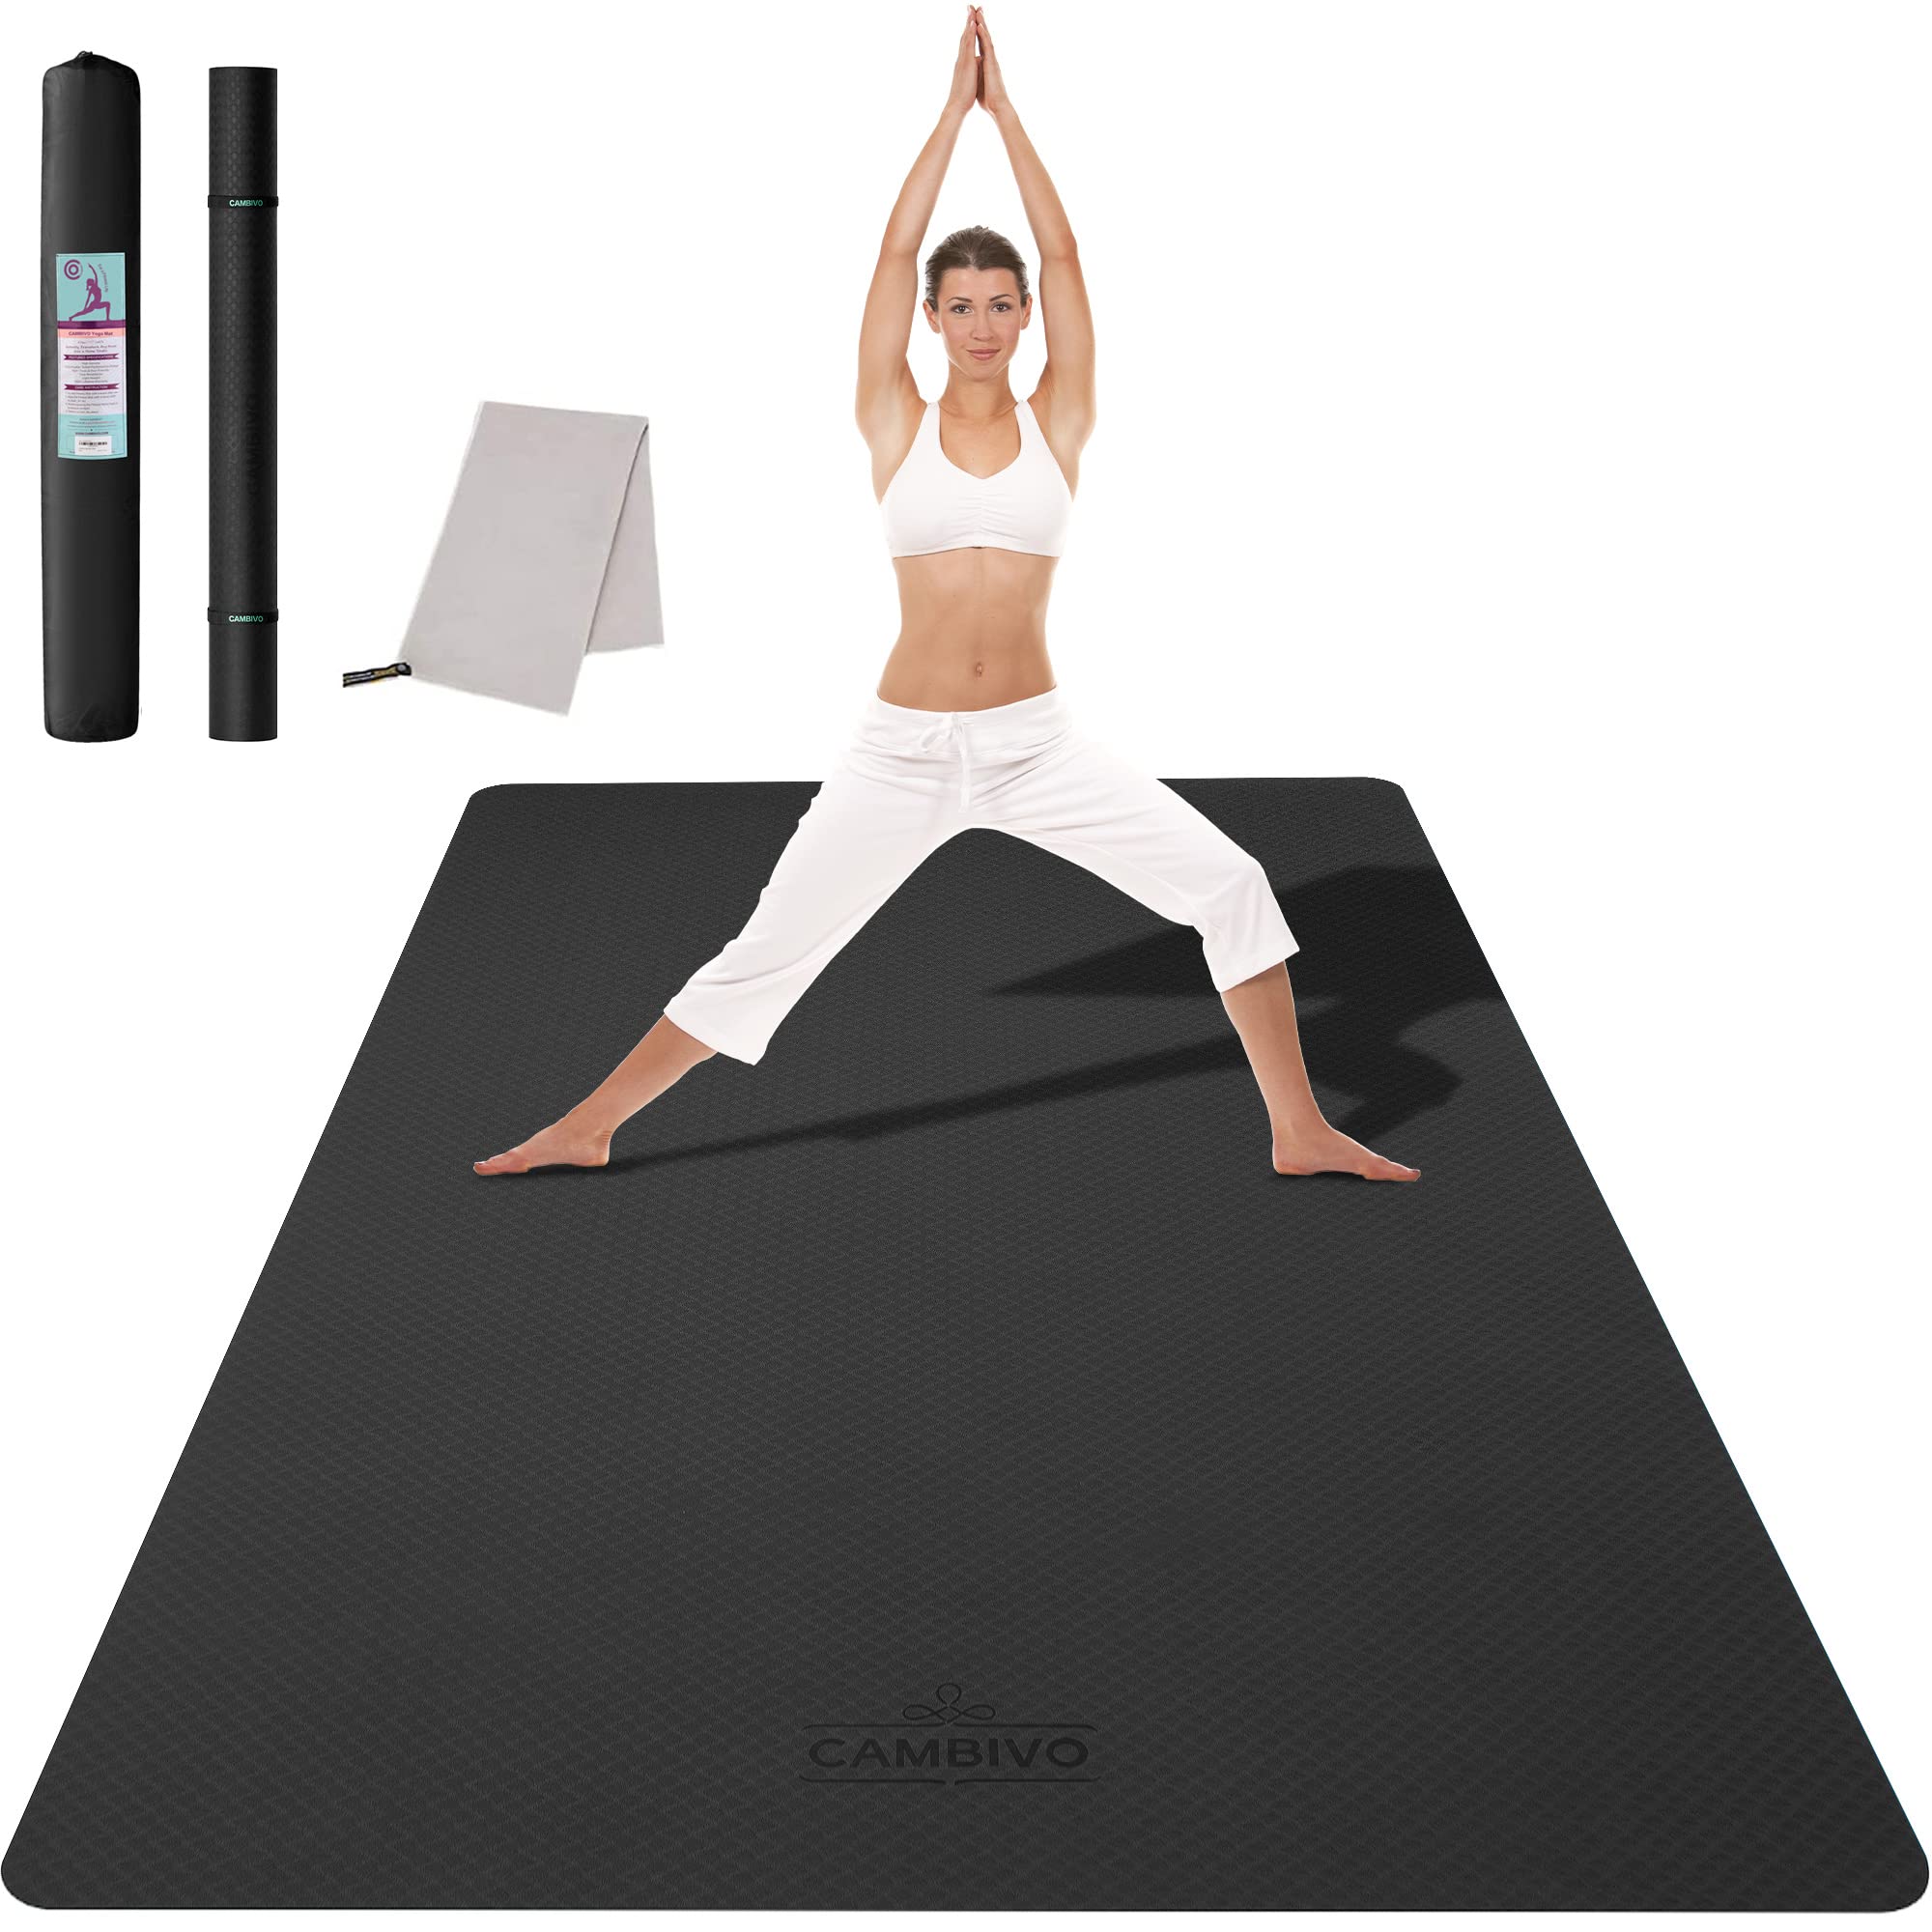 CAMBIVO Large Yoga Mat (6'x 4'), Extra Wide Workout Mat for Men and Women, Yoga  Mat Thick 1/3 &1/4 Exercise Mats for Home Workout, Yoga, Pilates (Black,1/4  inch) BLACK 6mm